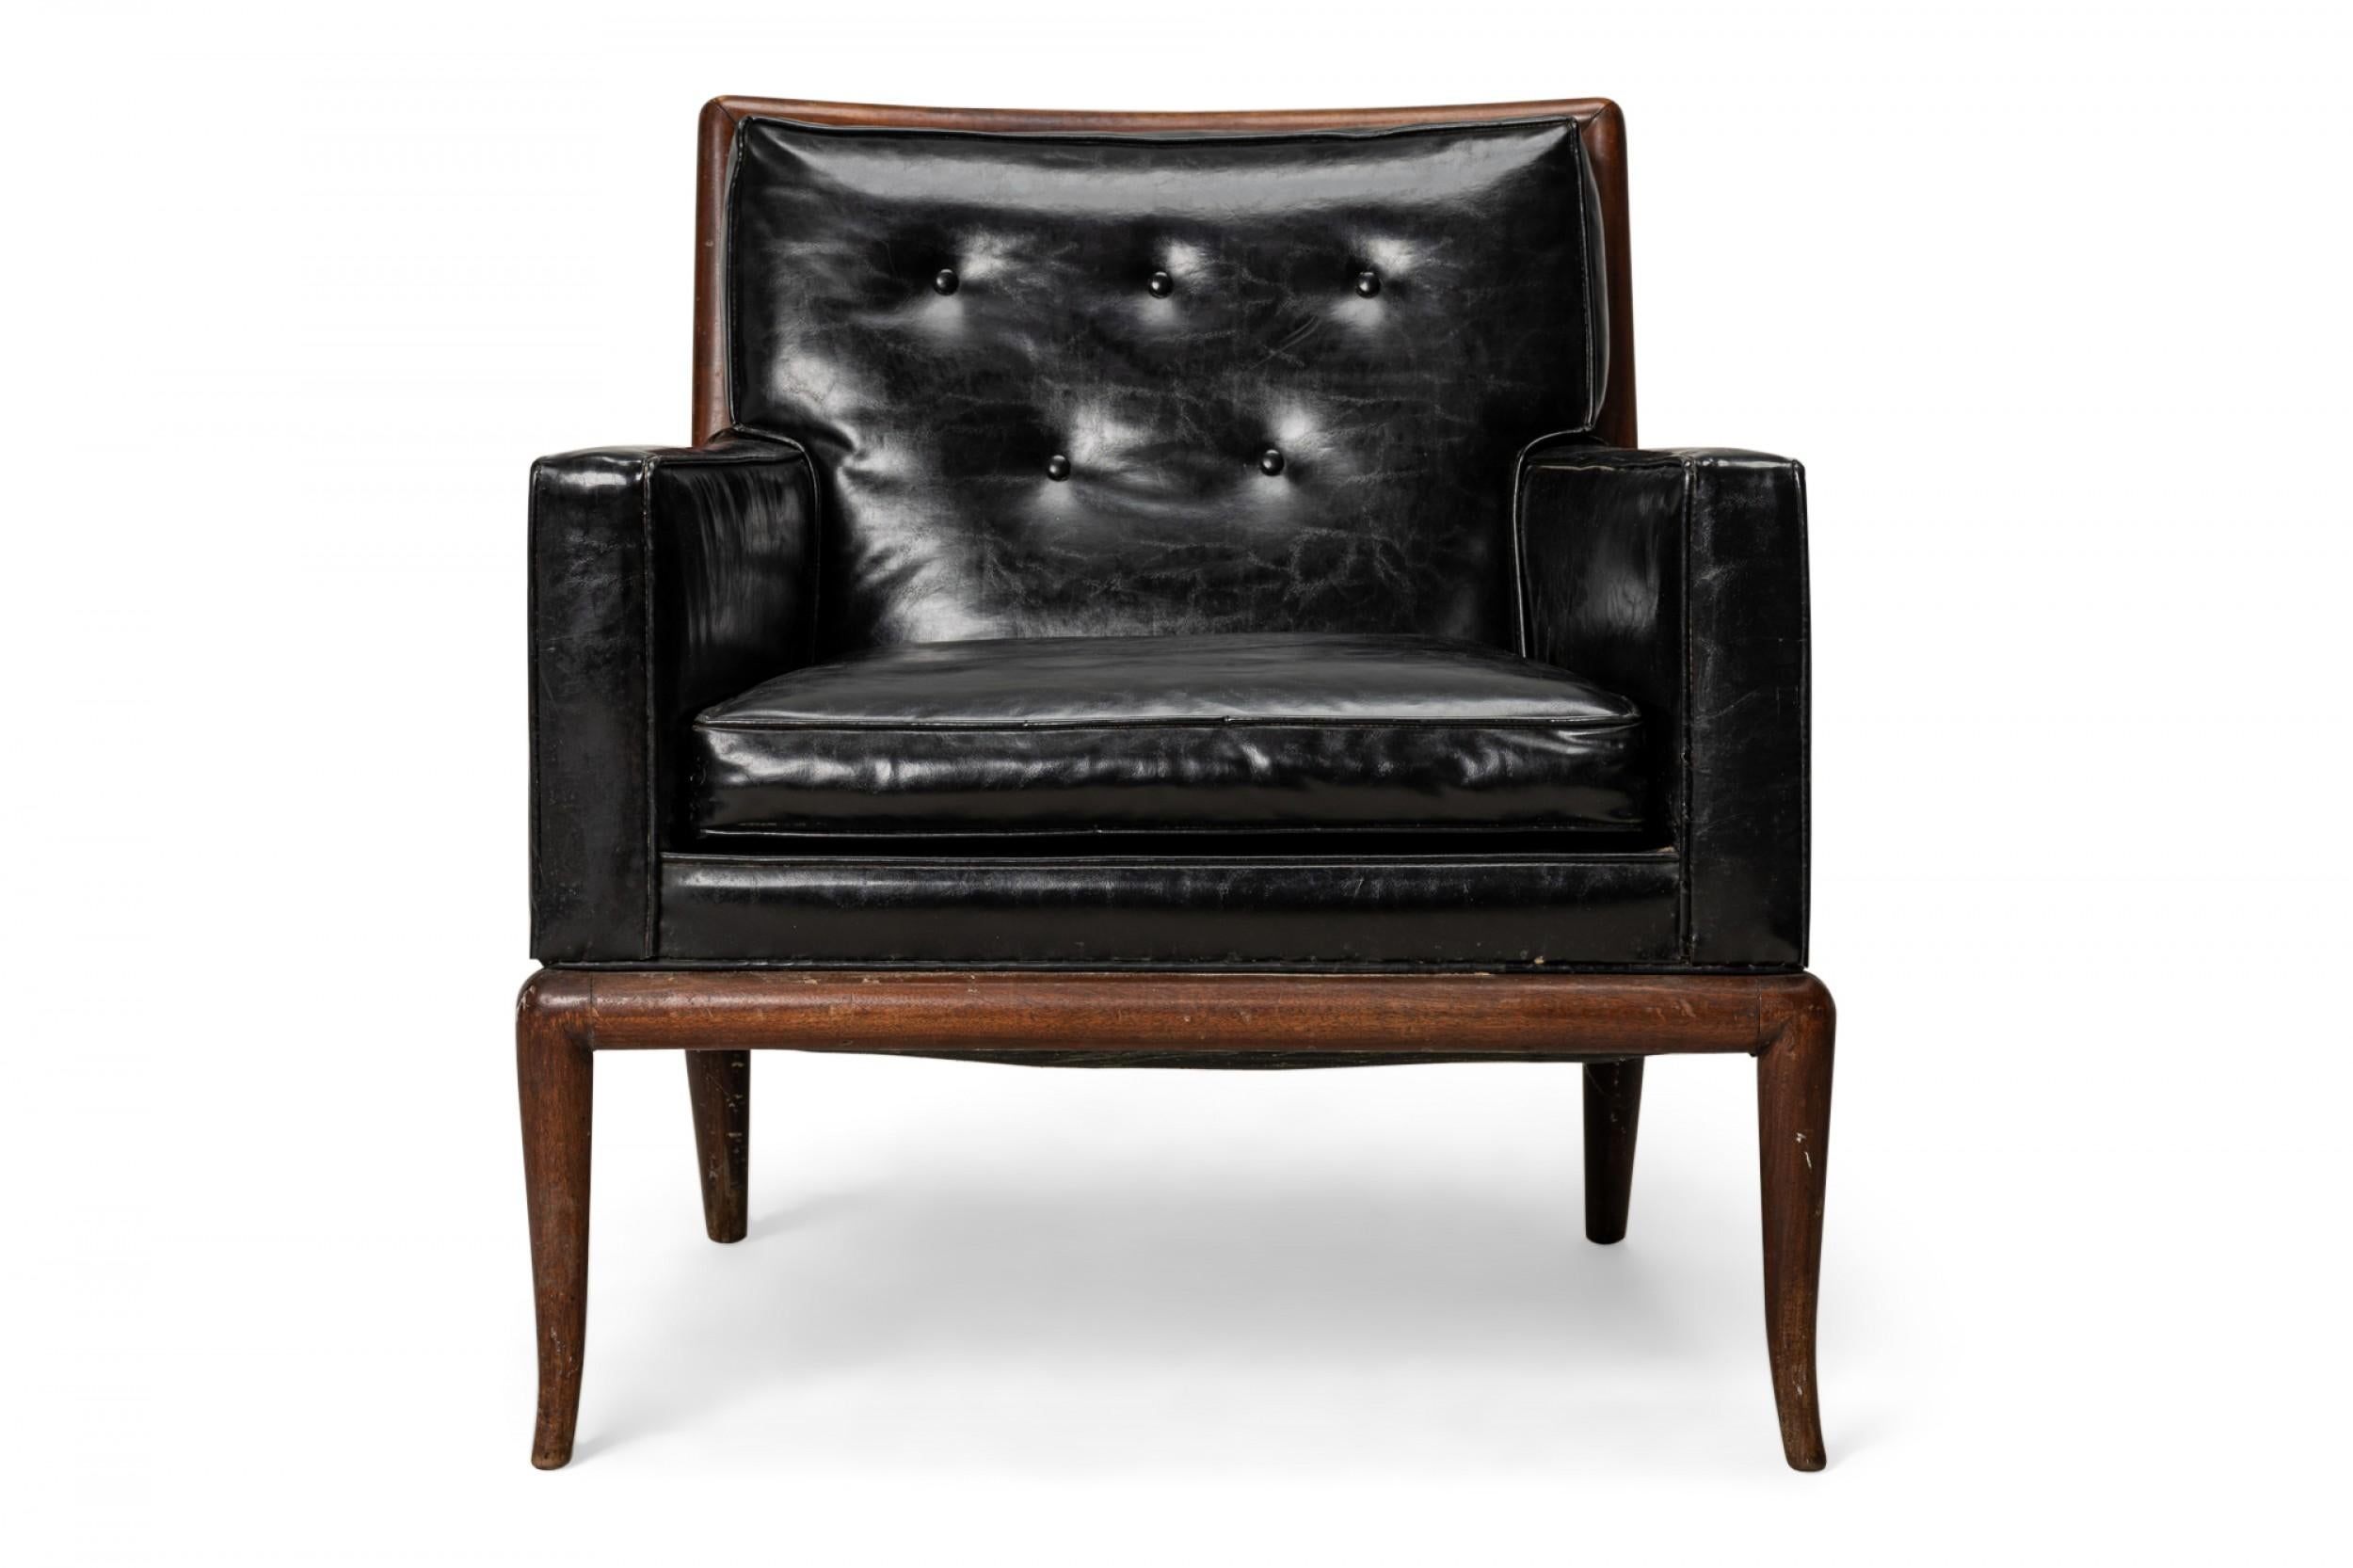 American mid-century lounge / armchair with a square walnut frame and black leather upholstery with a button tufted back, resting on four slightly curved and tapered walnut legs. (T.H. Robsjohn-Gibbings for Widdicomb Furniture Co.).
   